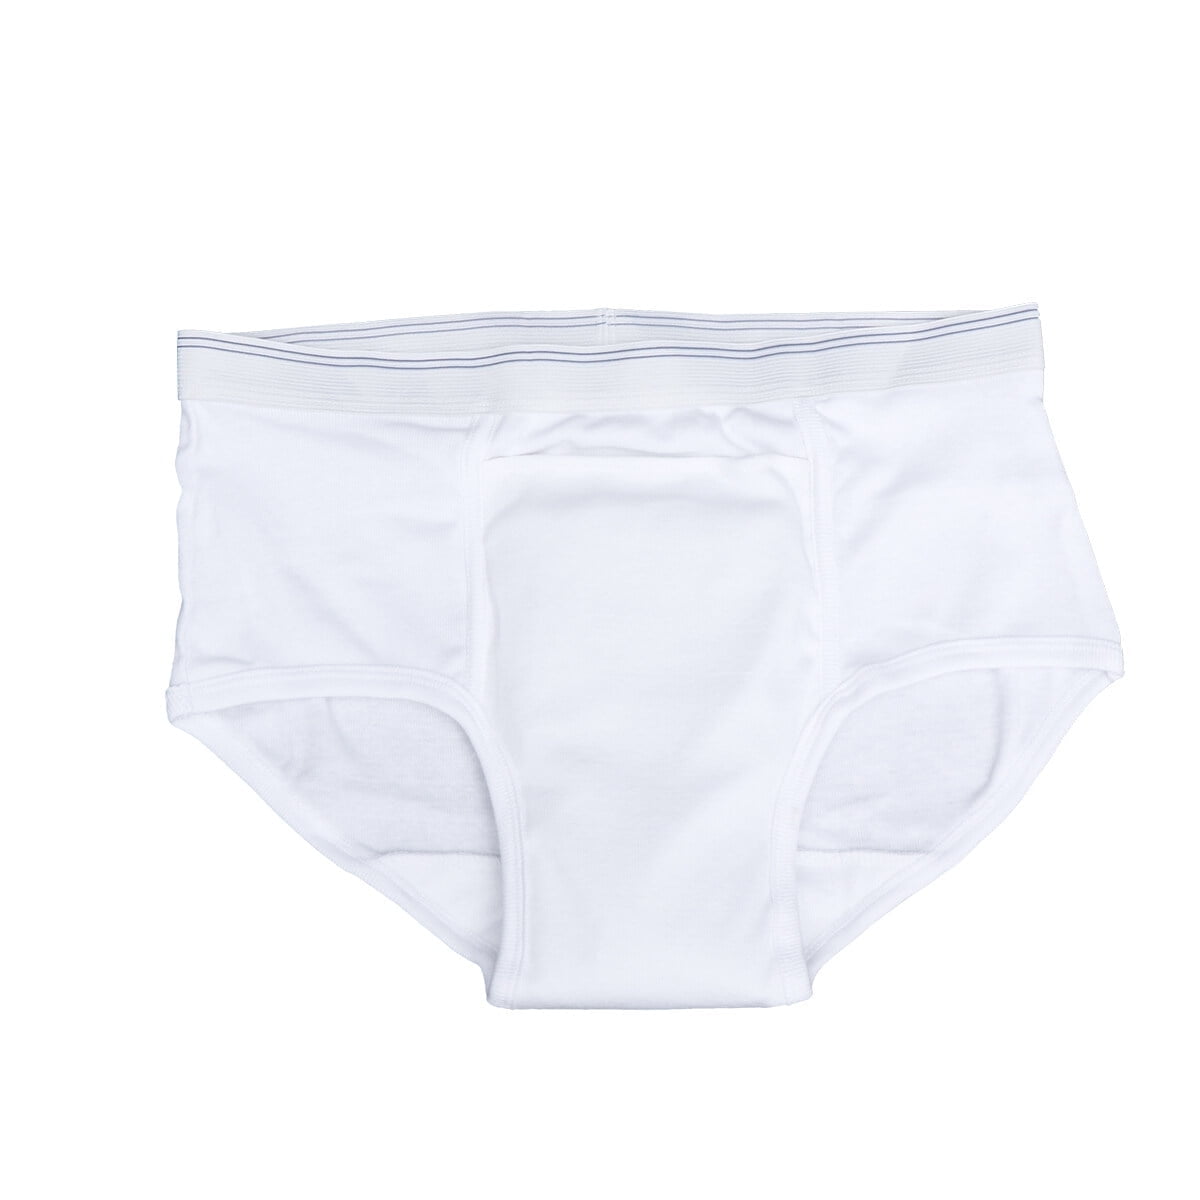 Incontinence Boxer Briefs